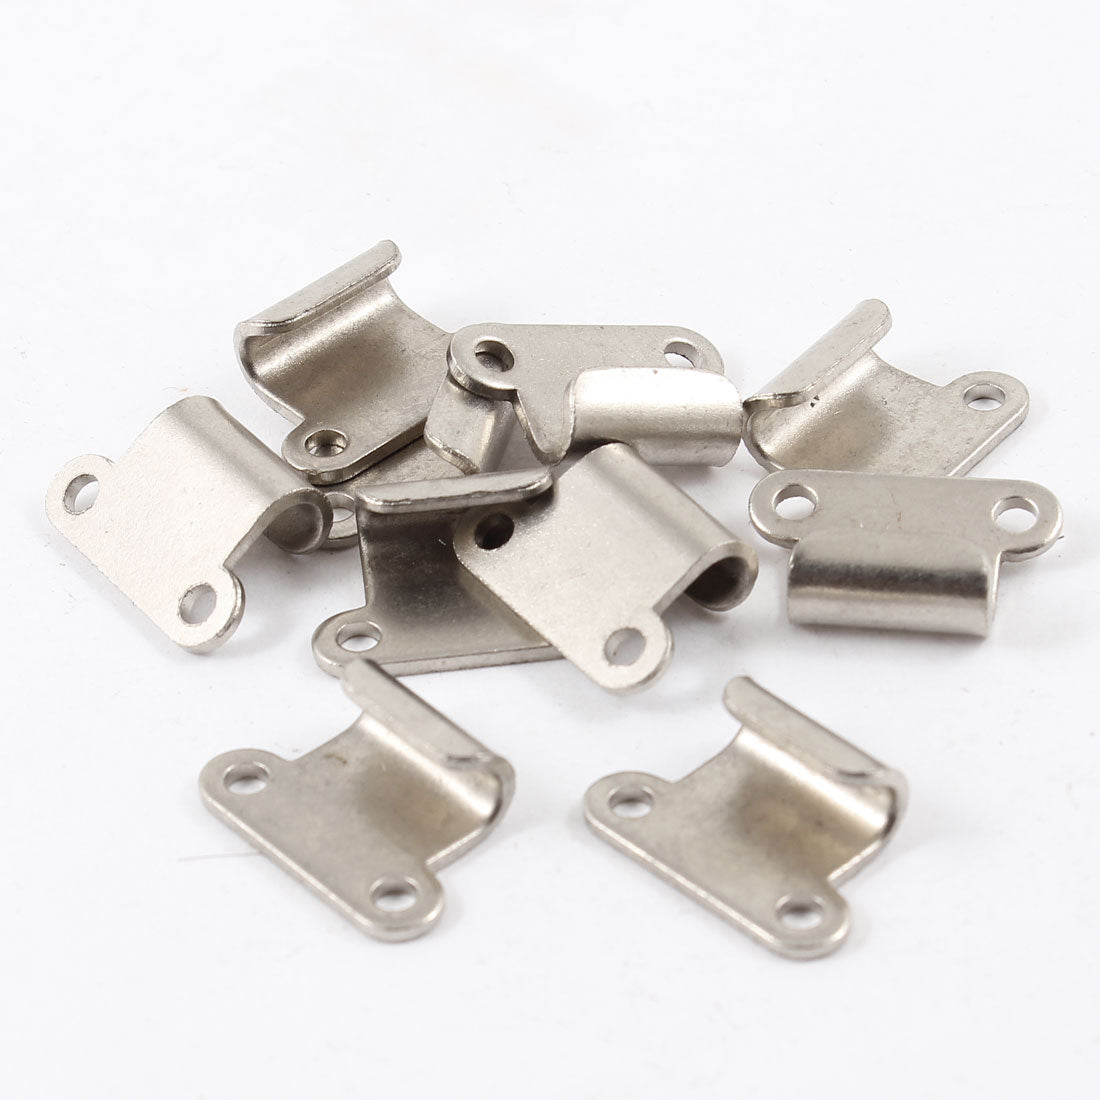 uxcell Uxcell 10 Pcs Metal Strike Plate 2.4cm x 1.5cm for Toggle Draw Latch